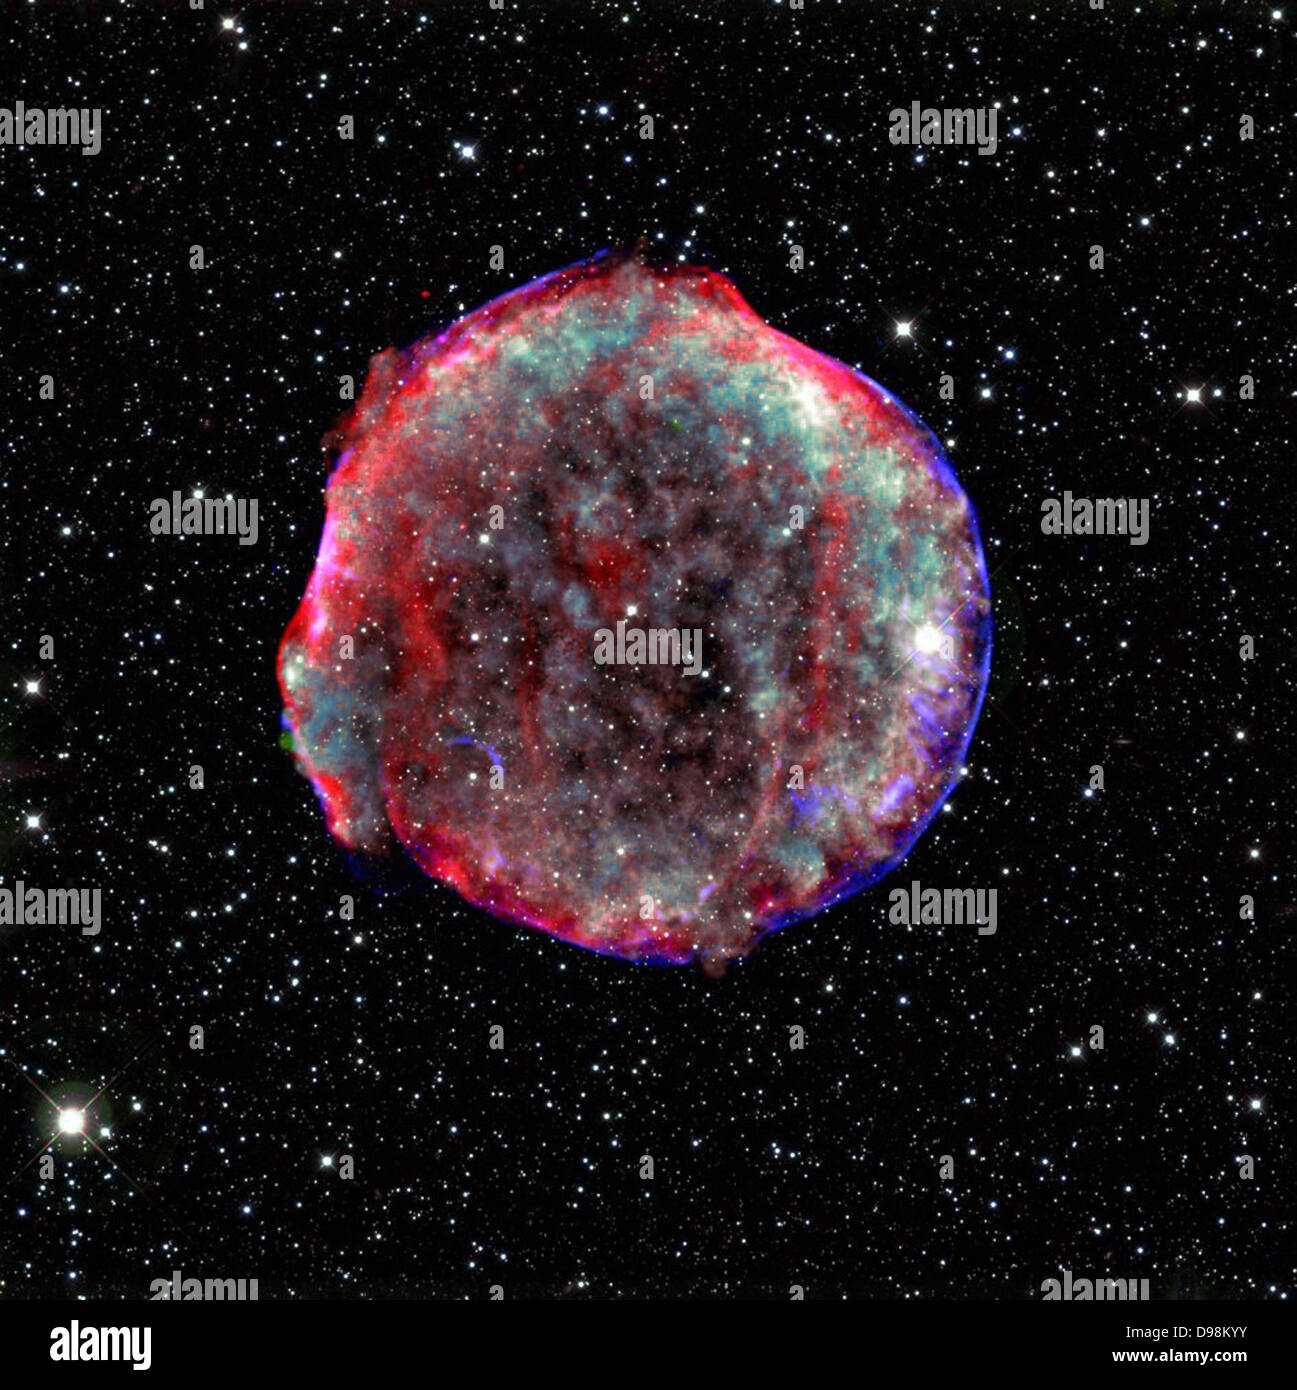 composite image of the Tycho supernova remnant combines infrared and X-ray observations obtained with NASA's Spitzer and Stock Photo